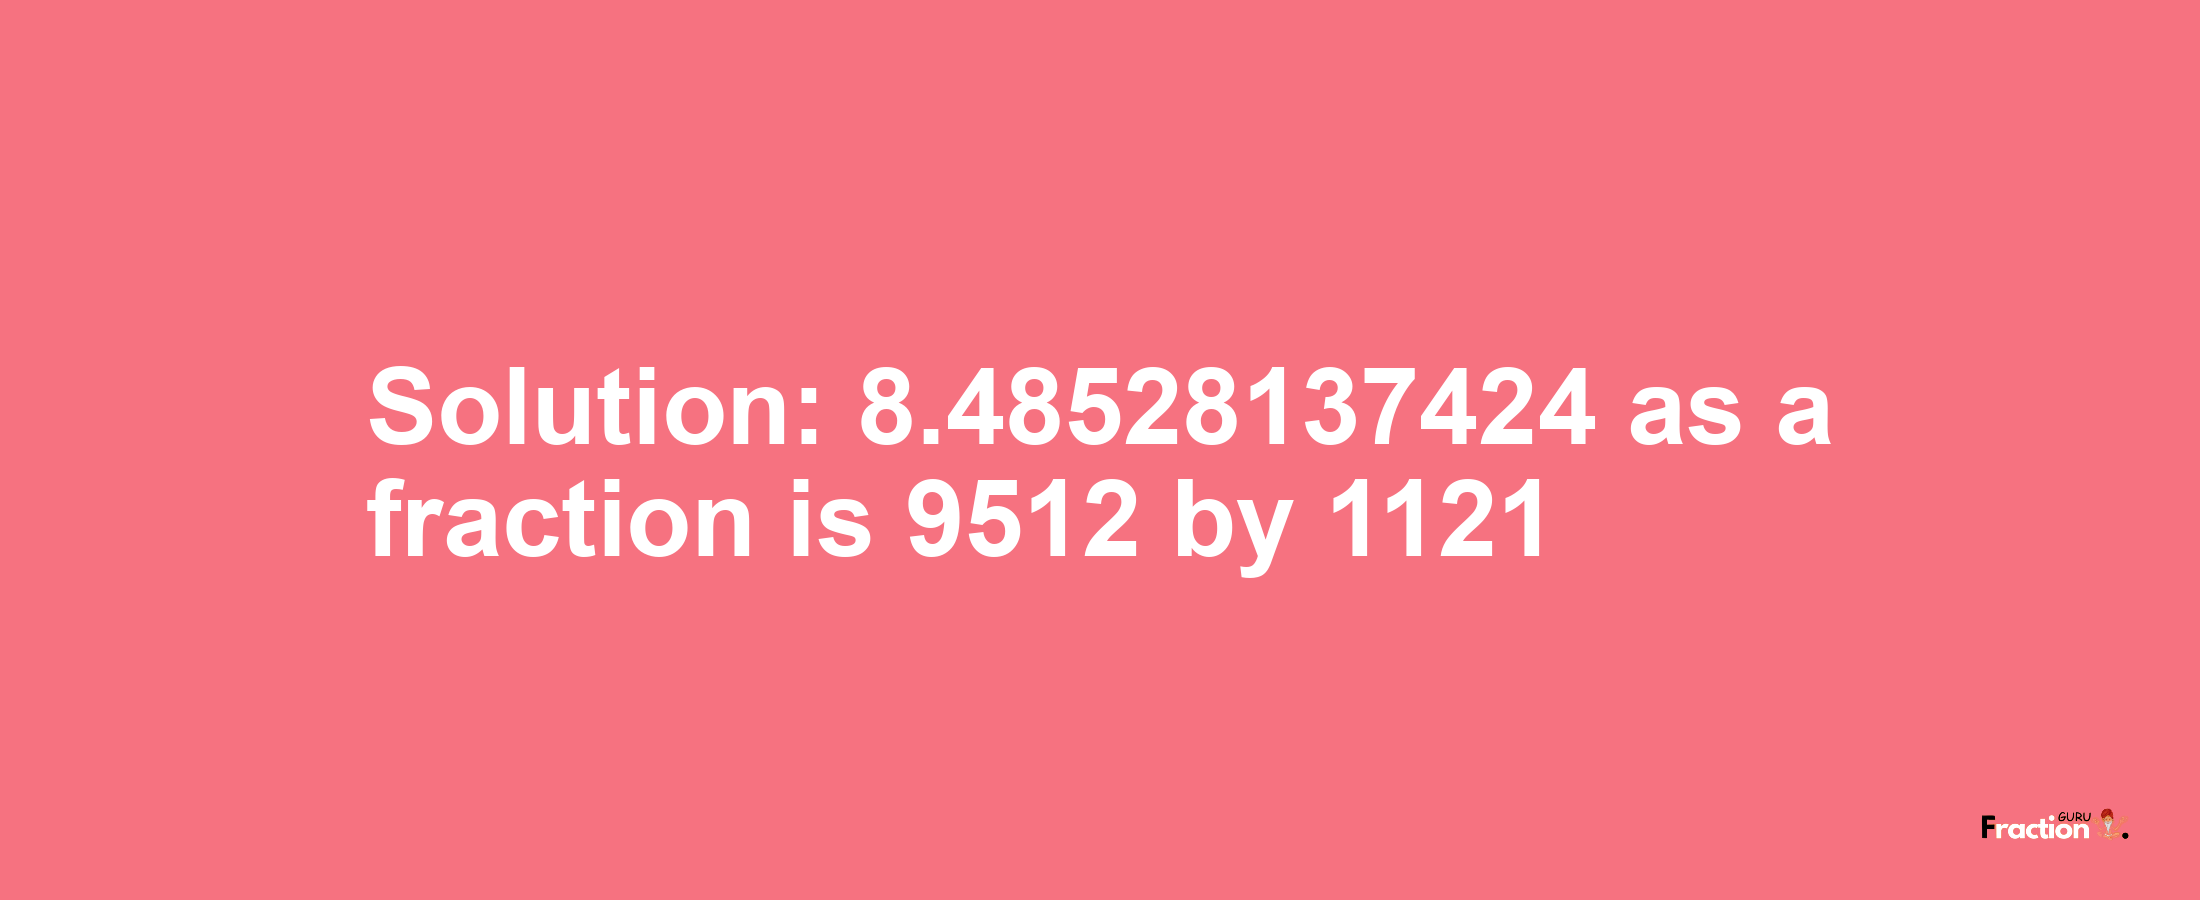 Solution:8.48528137424 as a fraction is 9512/1121